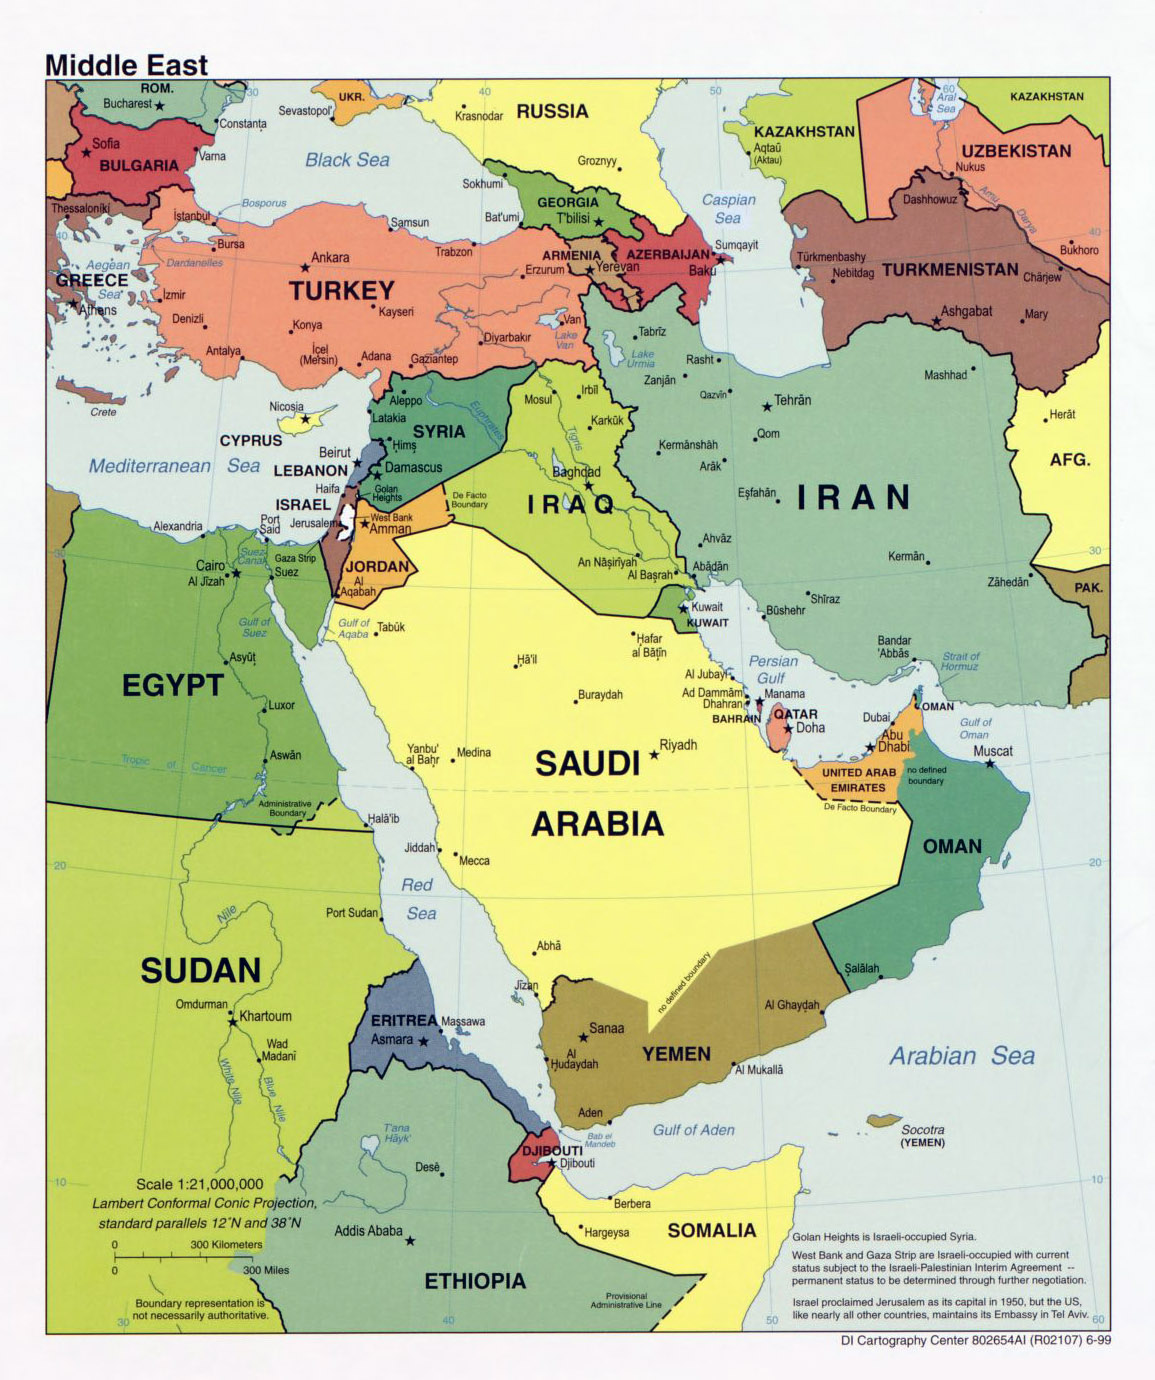 capitals of middle east countries